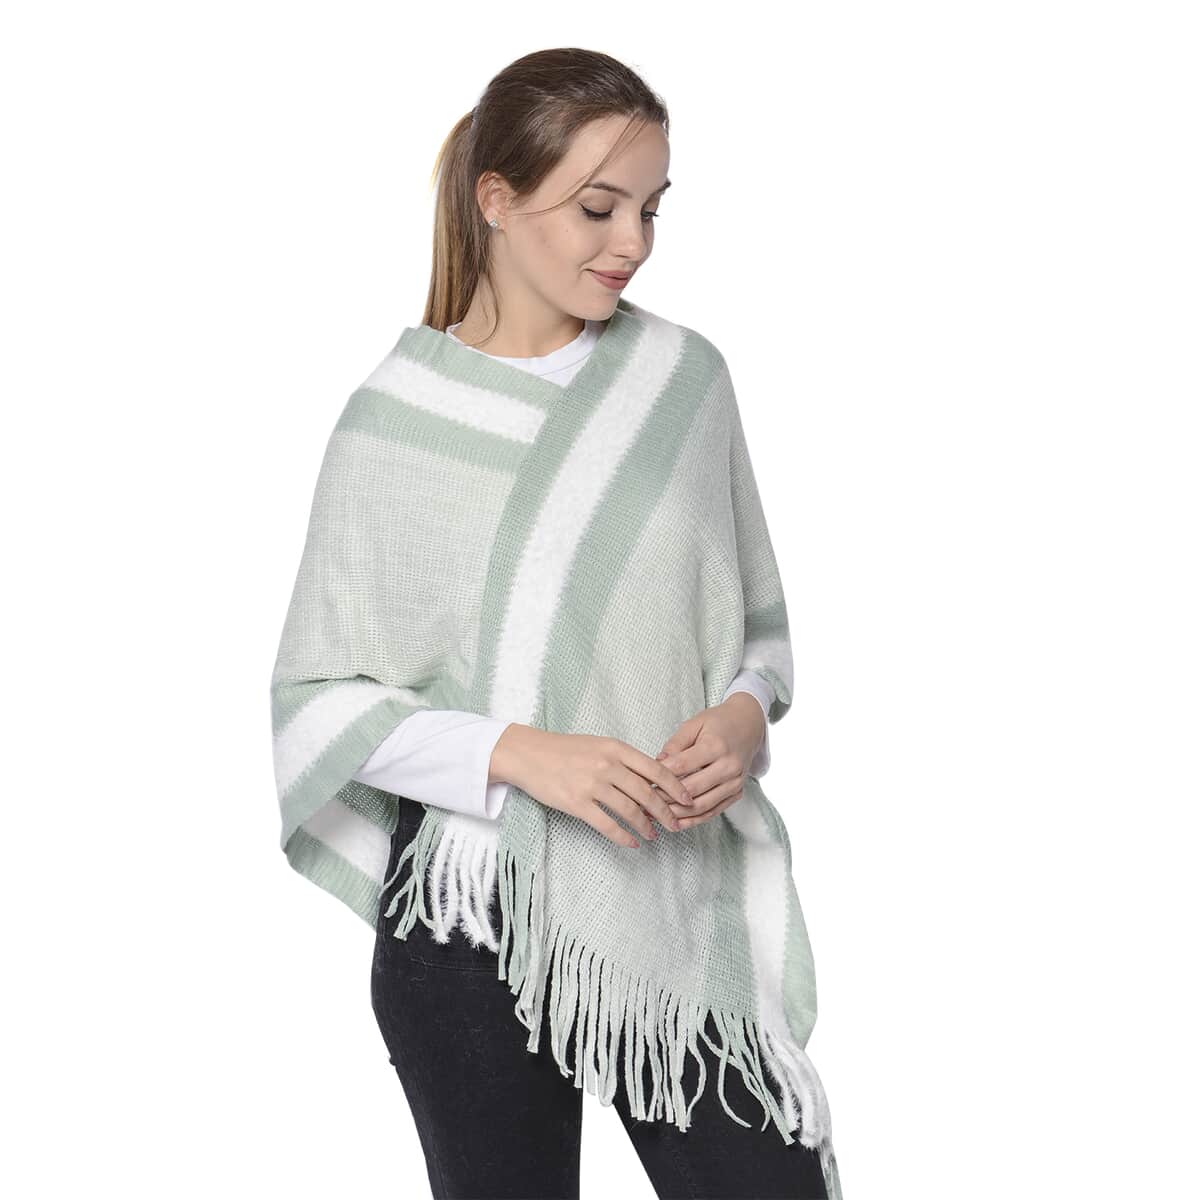 Seafoam Green Striped Border Poncho with Fringe (70% Acrylic and 30% Polyester) image number 2